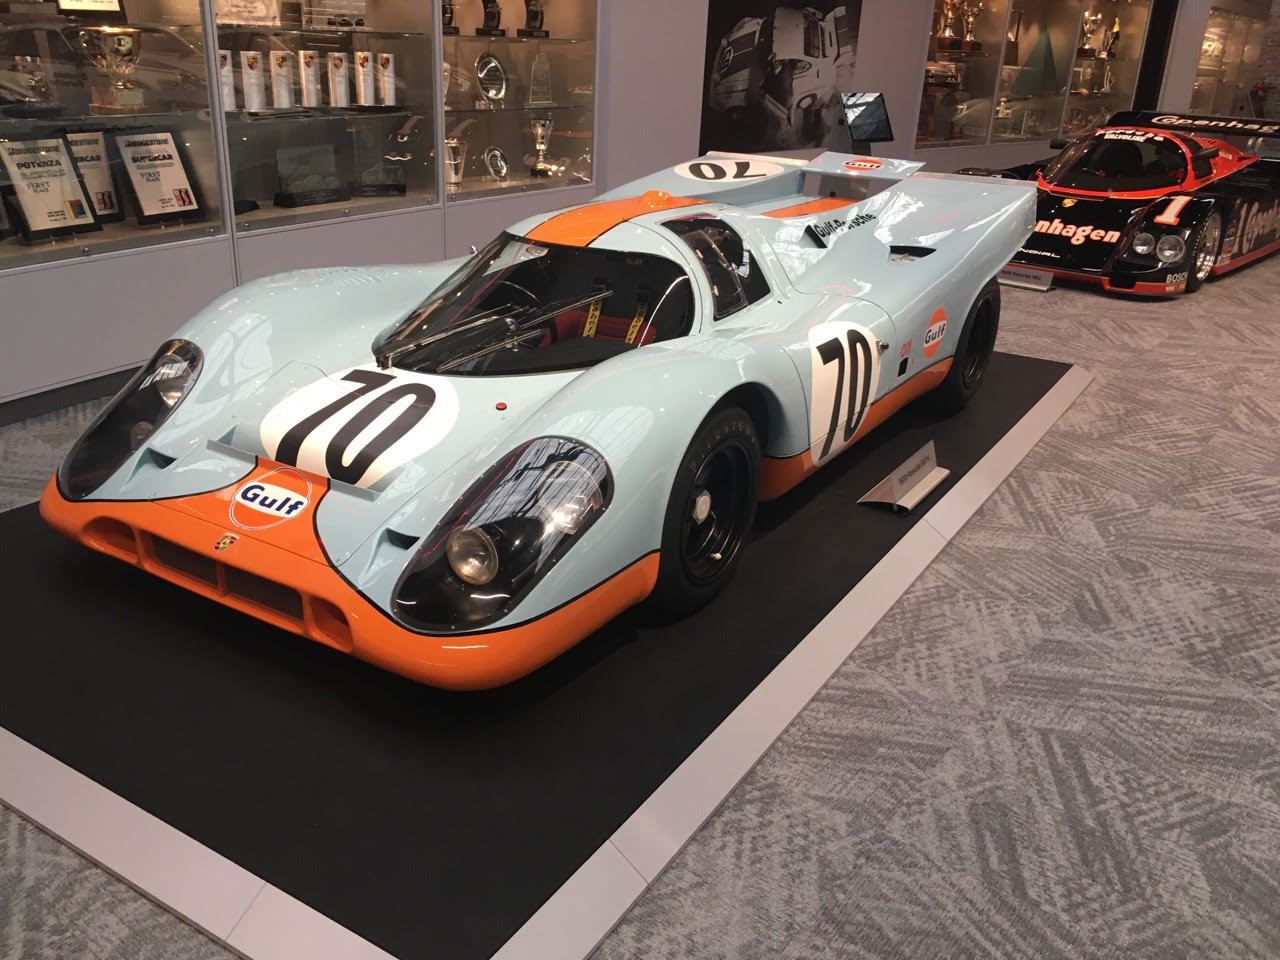 The museum features the Porsche 917K that was featured in the 1970 film “Le Mans” starring Steve McQueen. It’s the No. 70 car on the right.